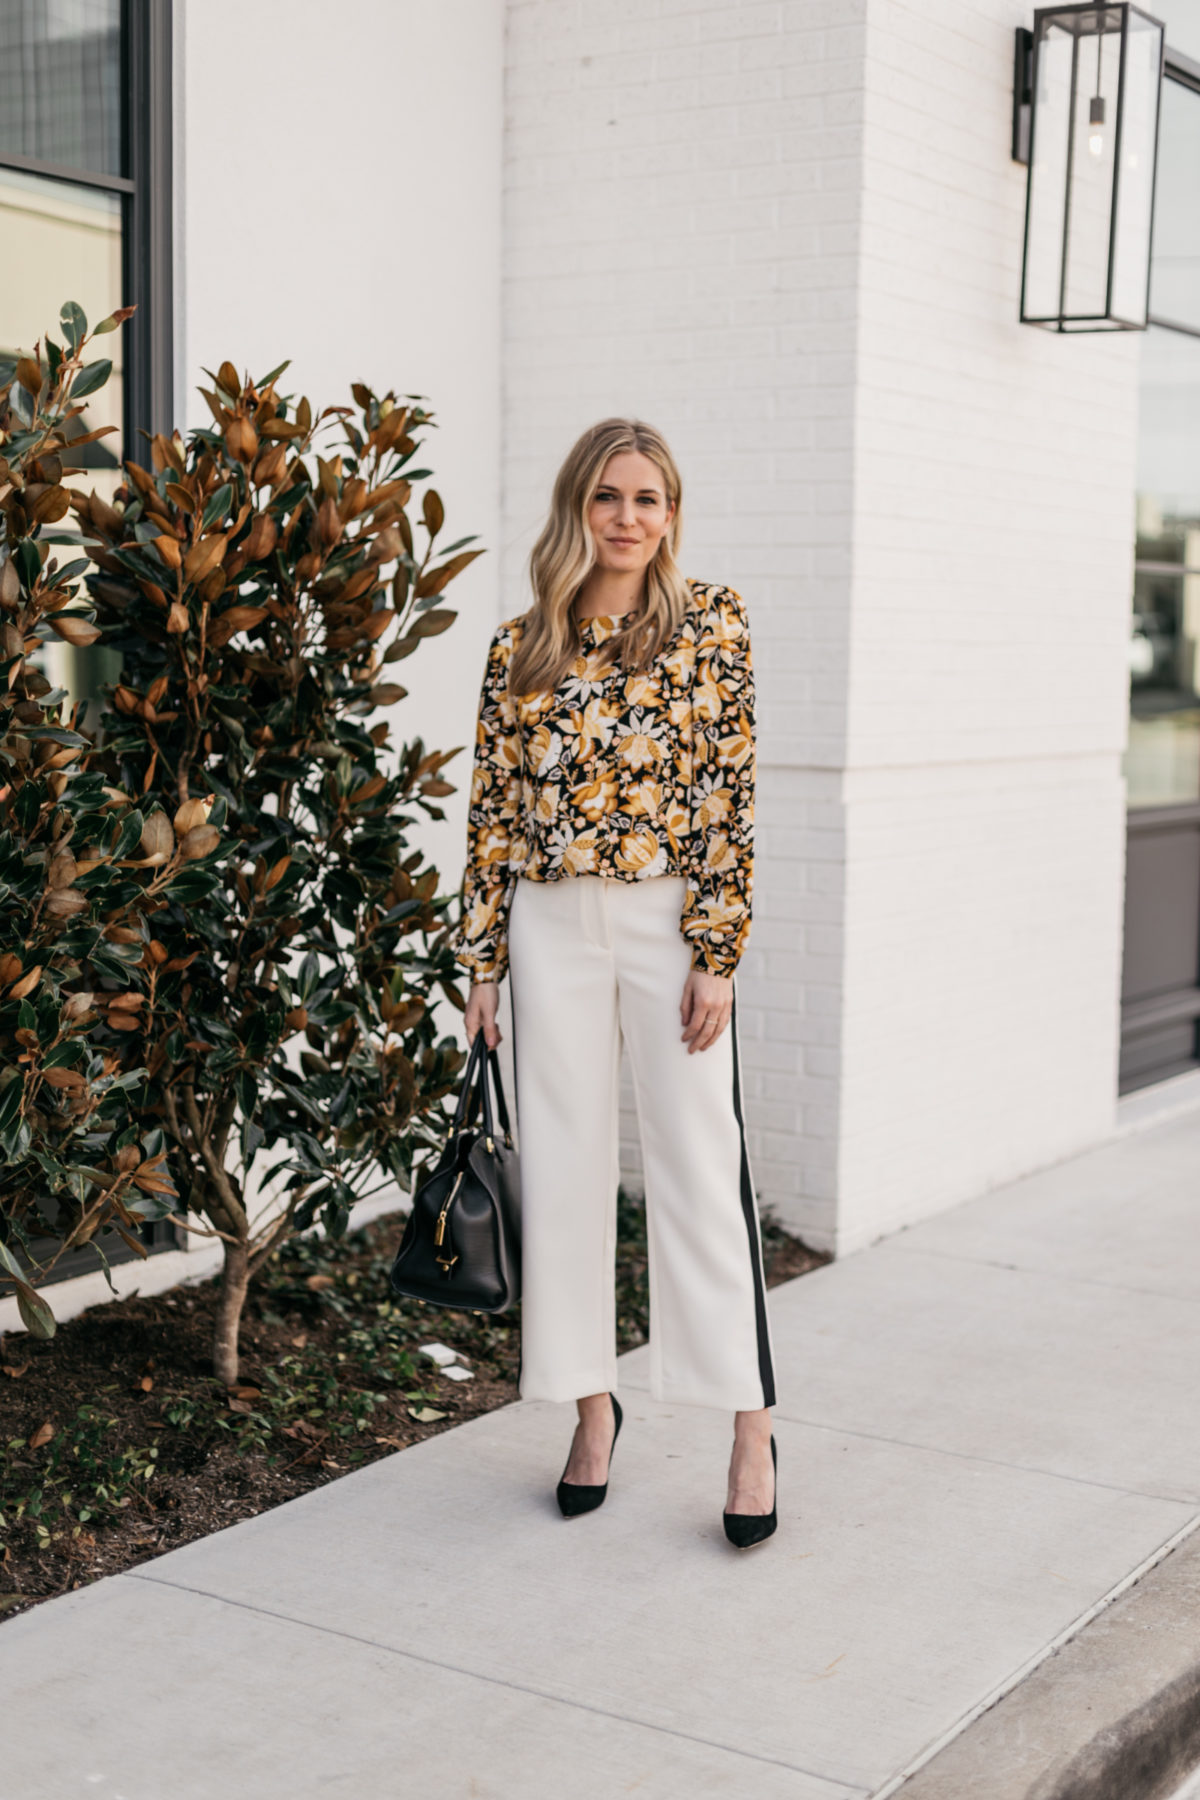 OUTFIT 2  White with Black Stripe Pants // Yellow and Black Floral Long Sleeve Blouse // Black Suede Heels // Black Work Bag